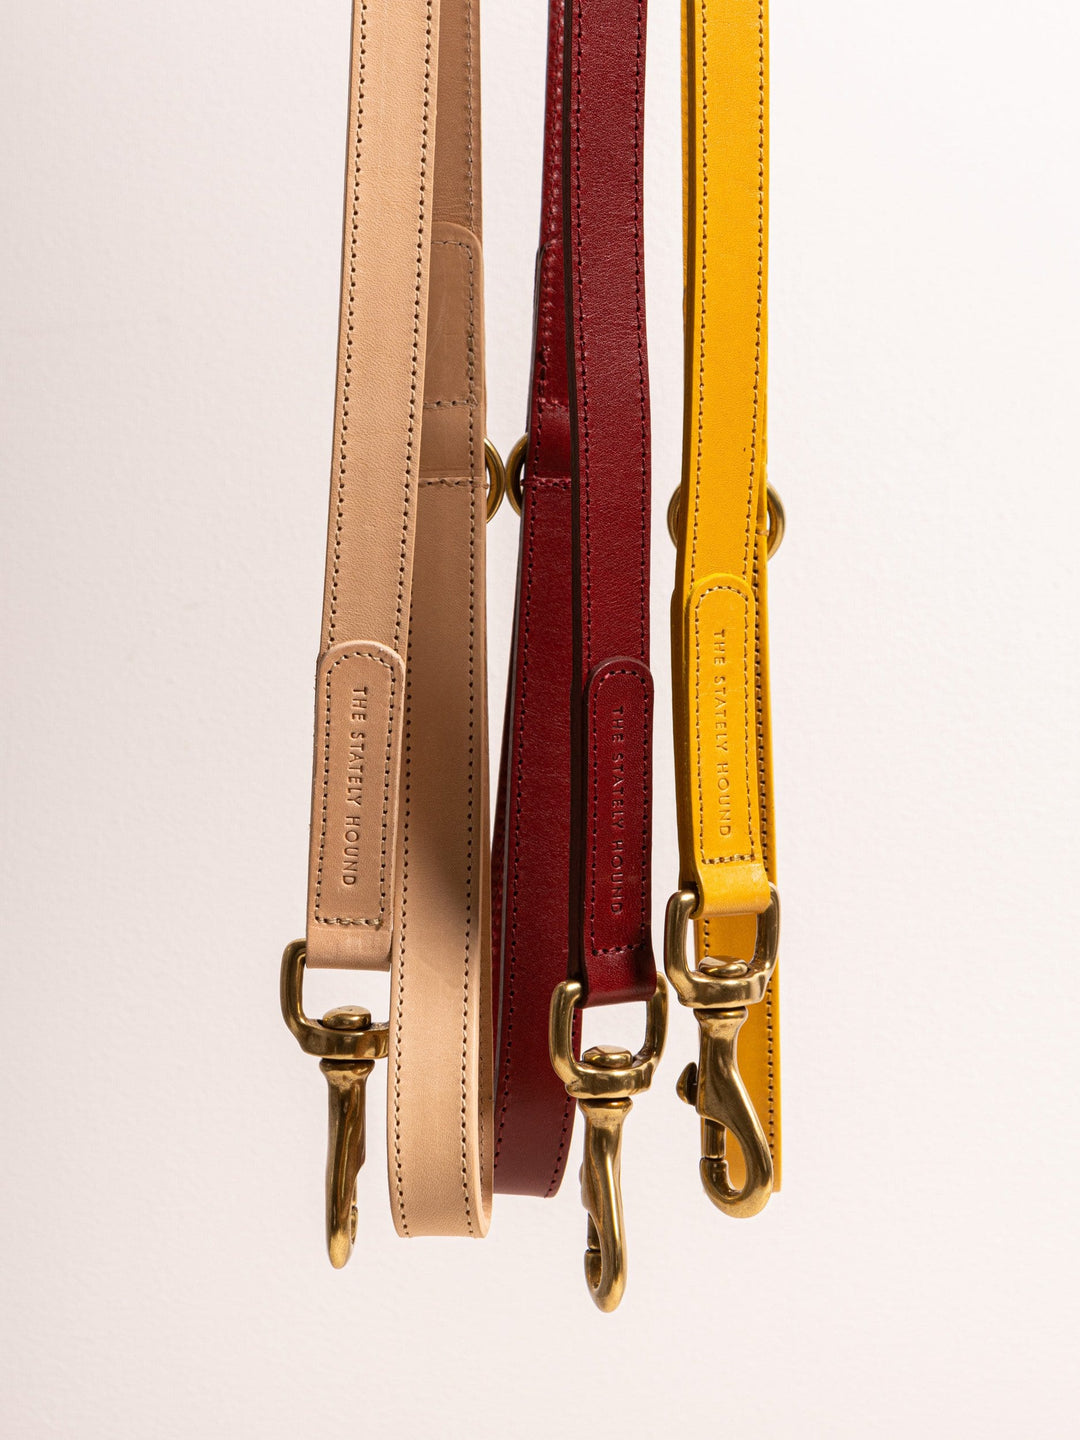 Hand-Stitched Premium Leather Dog Lead in Mustard Yellow with Brass Hardware